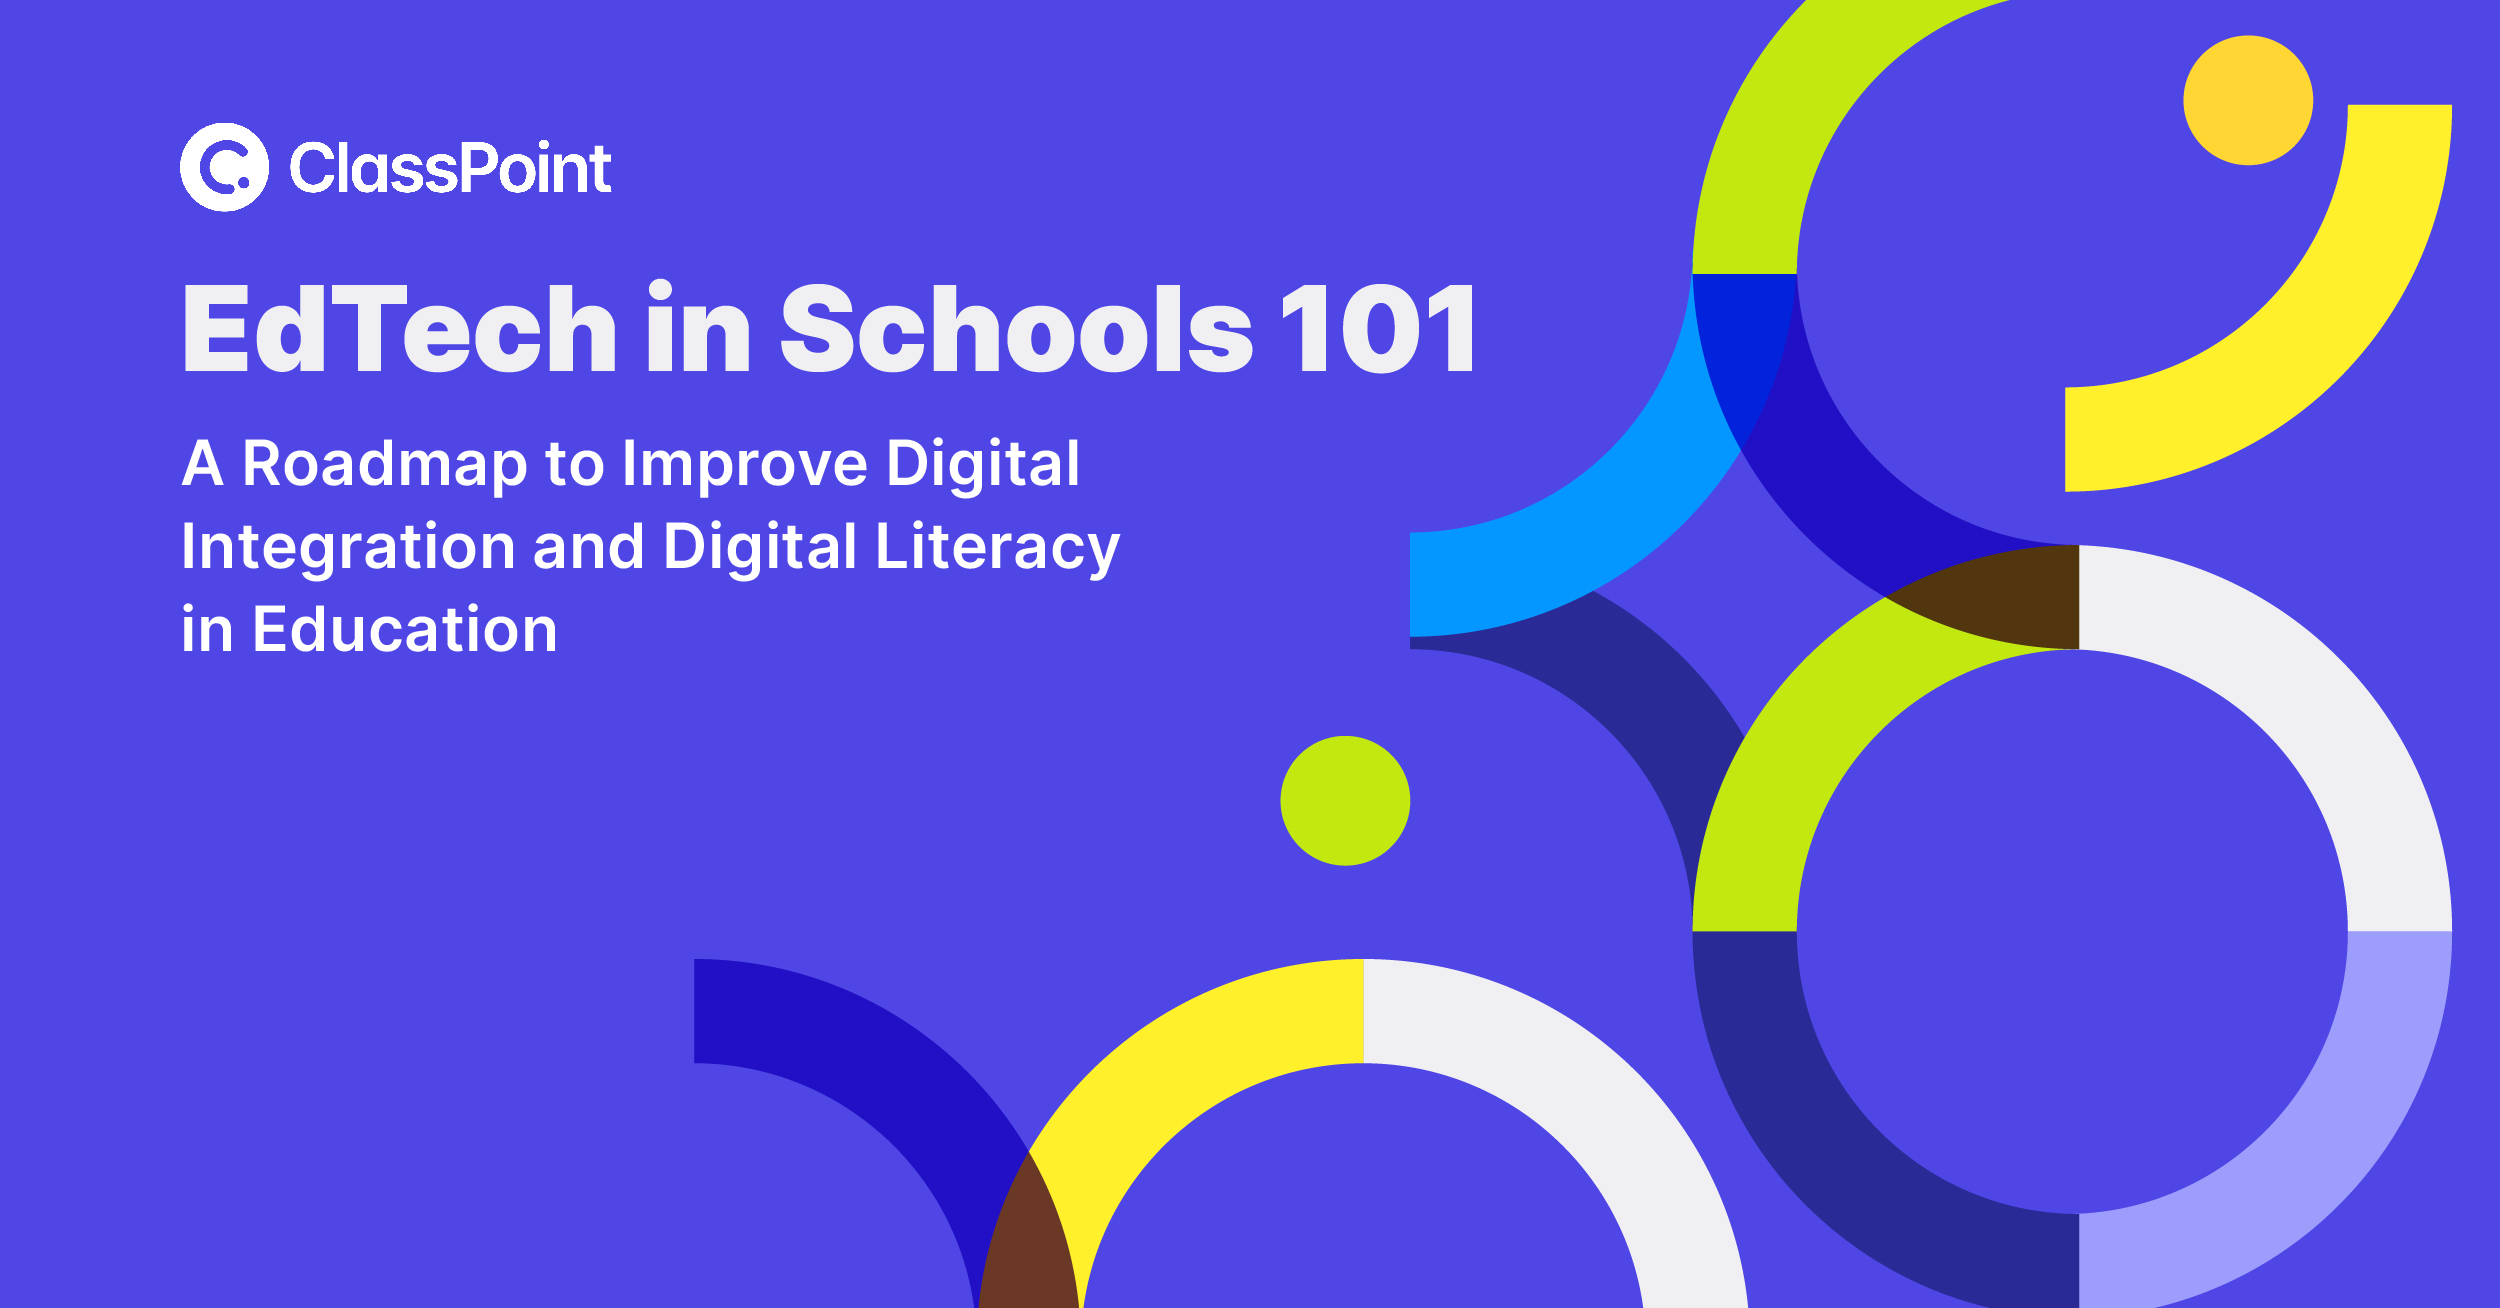 [White Paper] EdTech in Schools 101: A Roadmap to Improve Digital Integration and Digital Literacy in Education